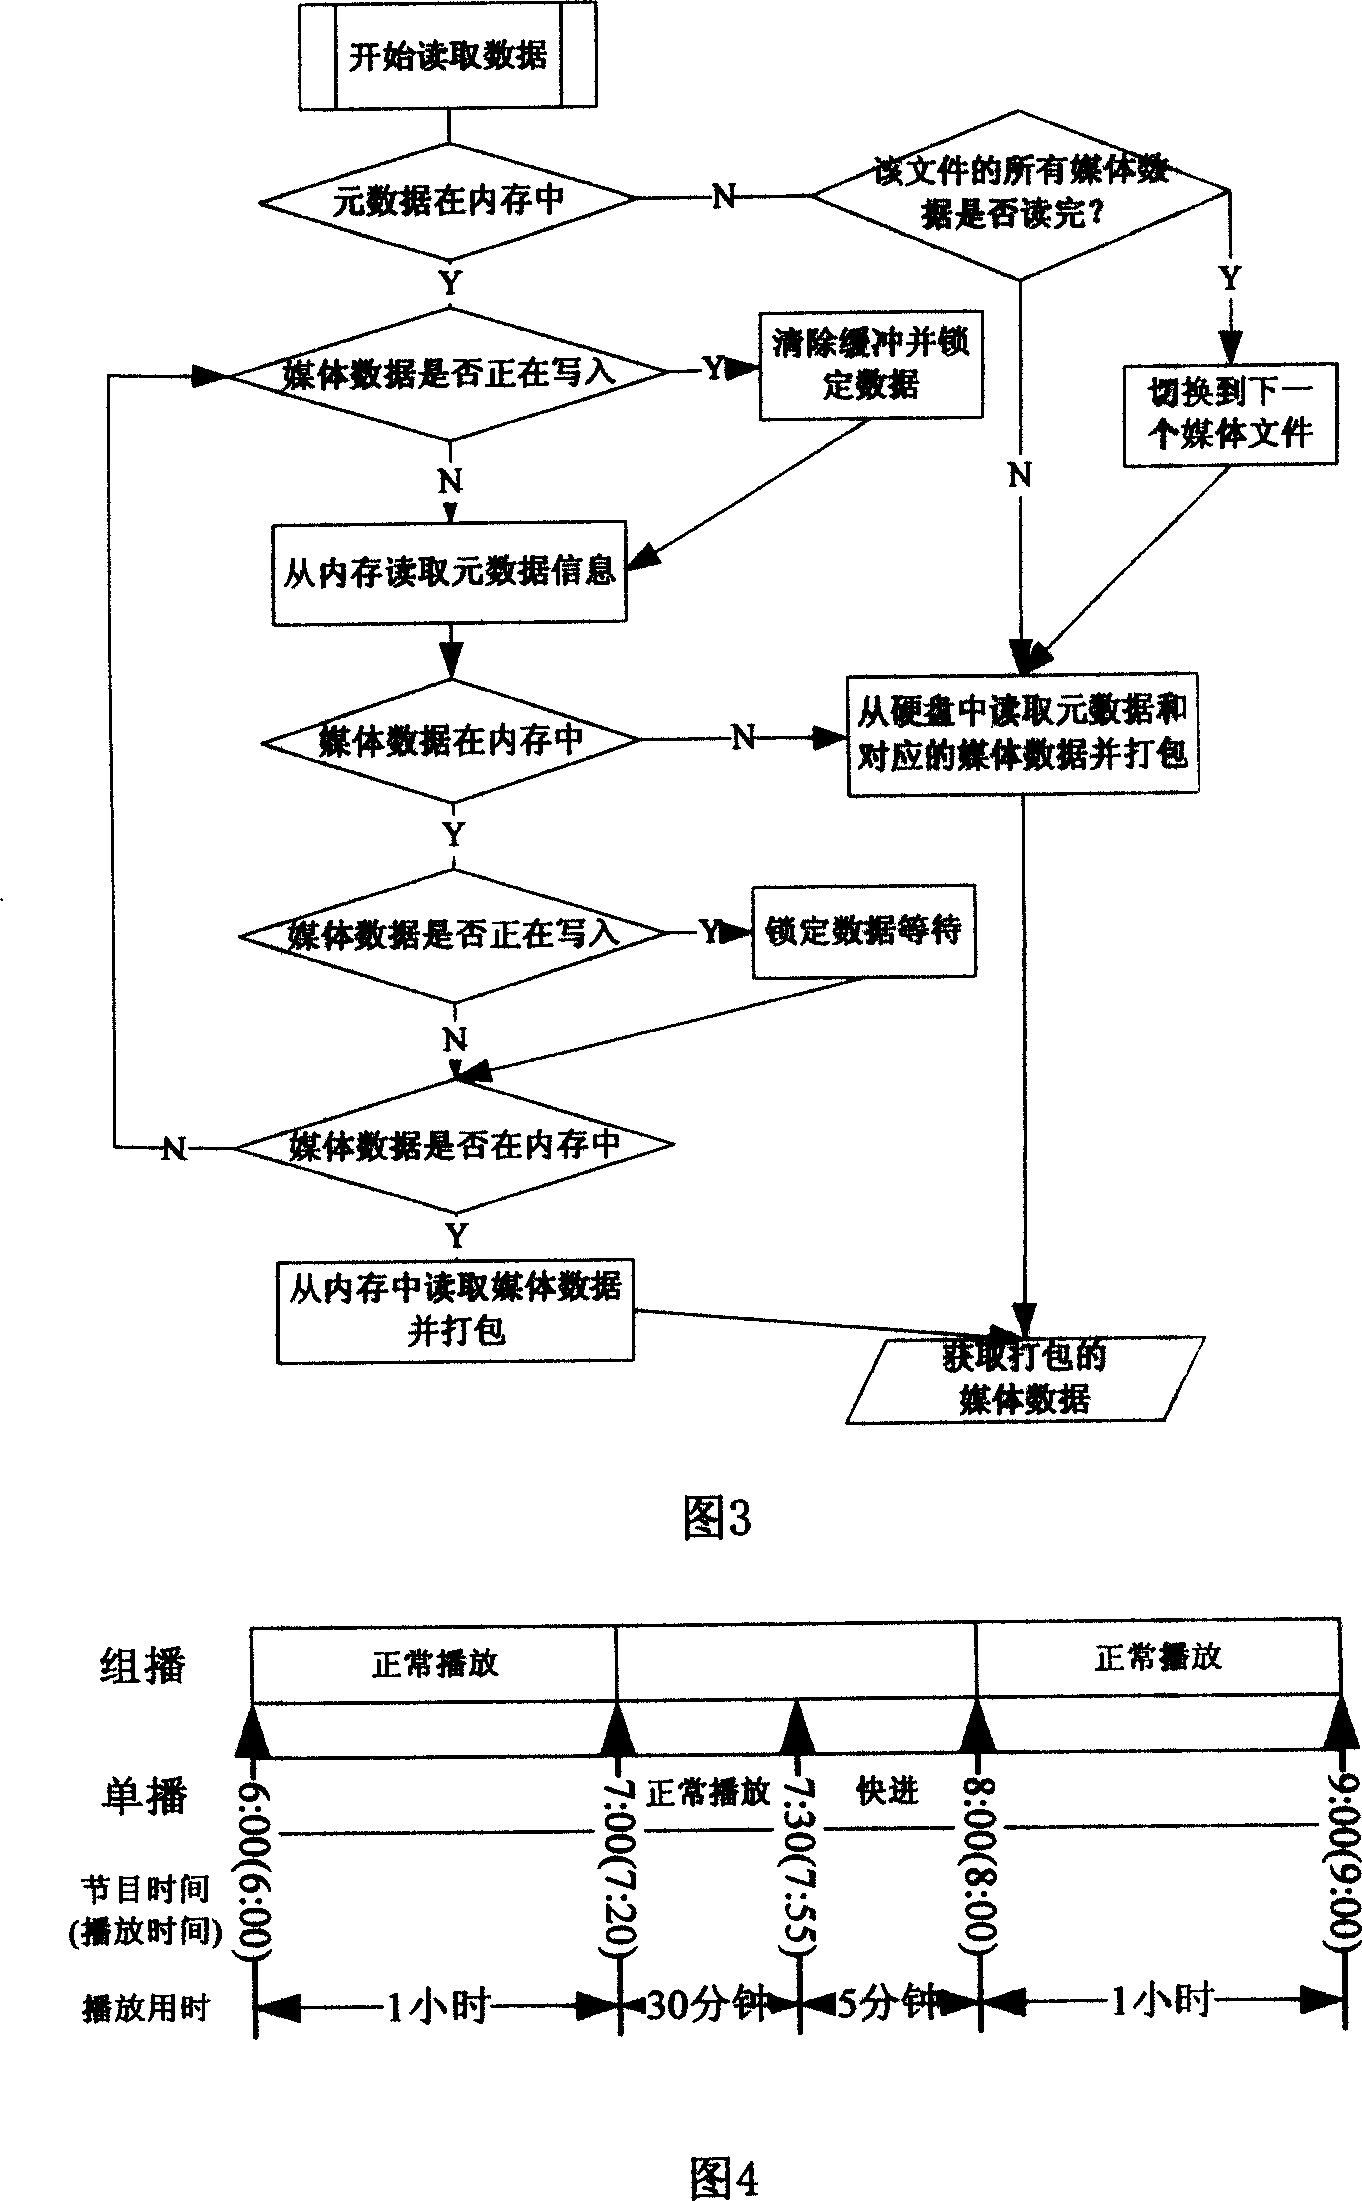 internet based TV stream data real time transmission and service apparatus and method